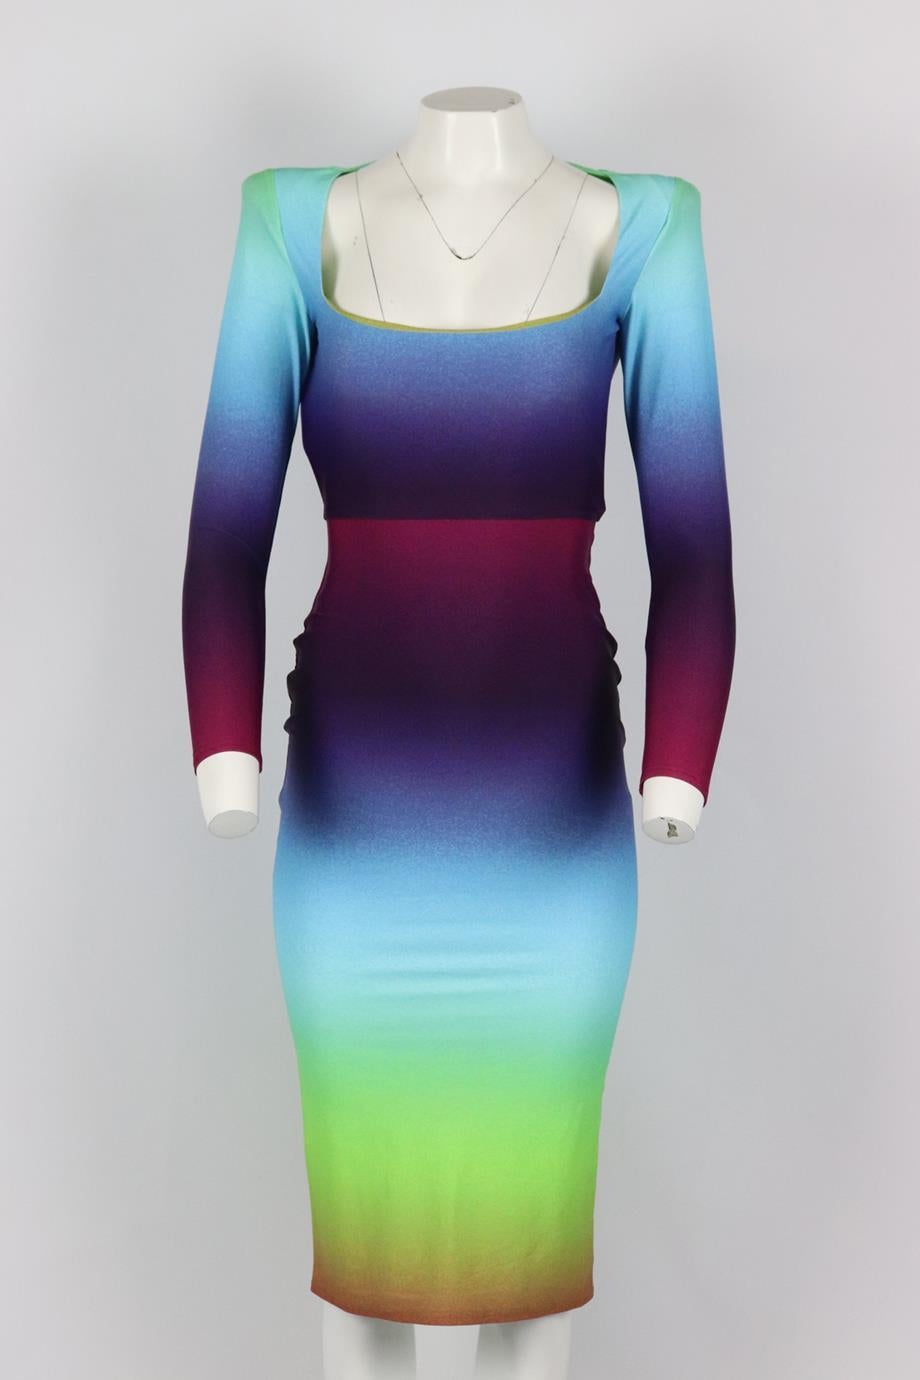 Alex Perry ombré stretch jersey midi dress. Multicoloured. Long sleeve, square neck. Zip fastening at back. 82% Nylon, 18% elastane. Size: UK 10 (US 6, FR 38, IT 42). Bust: 29 in. Waist: 22 in. Hips: 27.4 in. Length: 42.5 in. Very good condition -